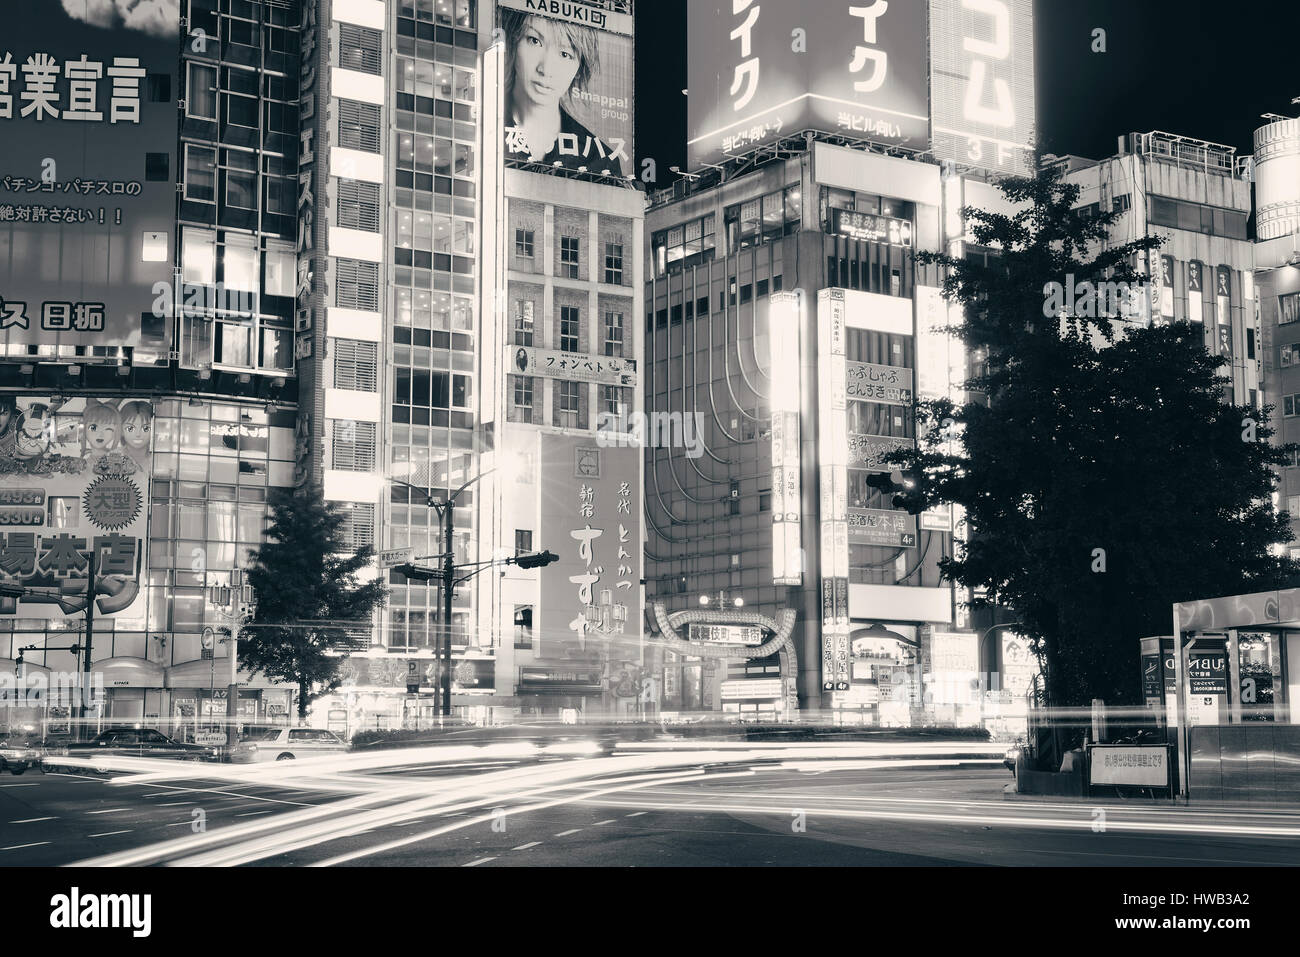 TOKYO, JAPAN - MAY 13: Street view at night on May 13, 2013 in Tokyo. Tokyo is the capital of Japan and the most populous metropolitan area in the wor Stock Photo